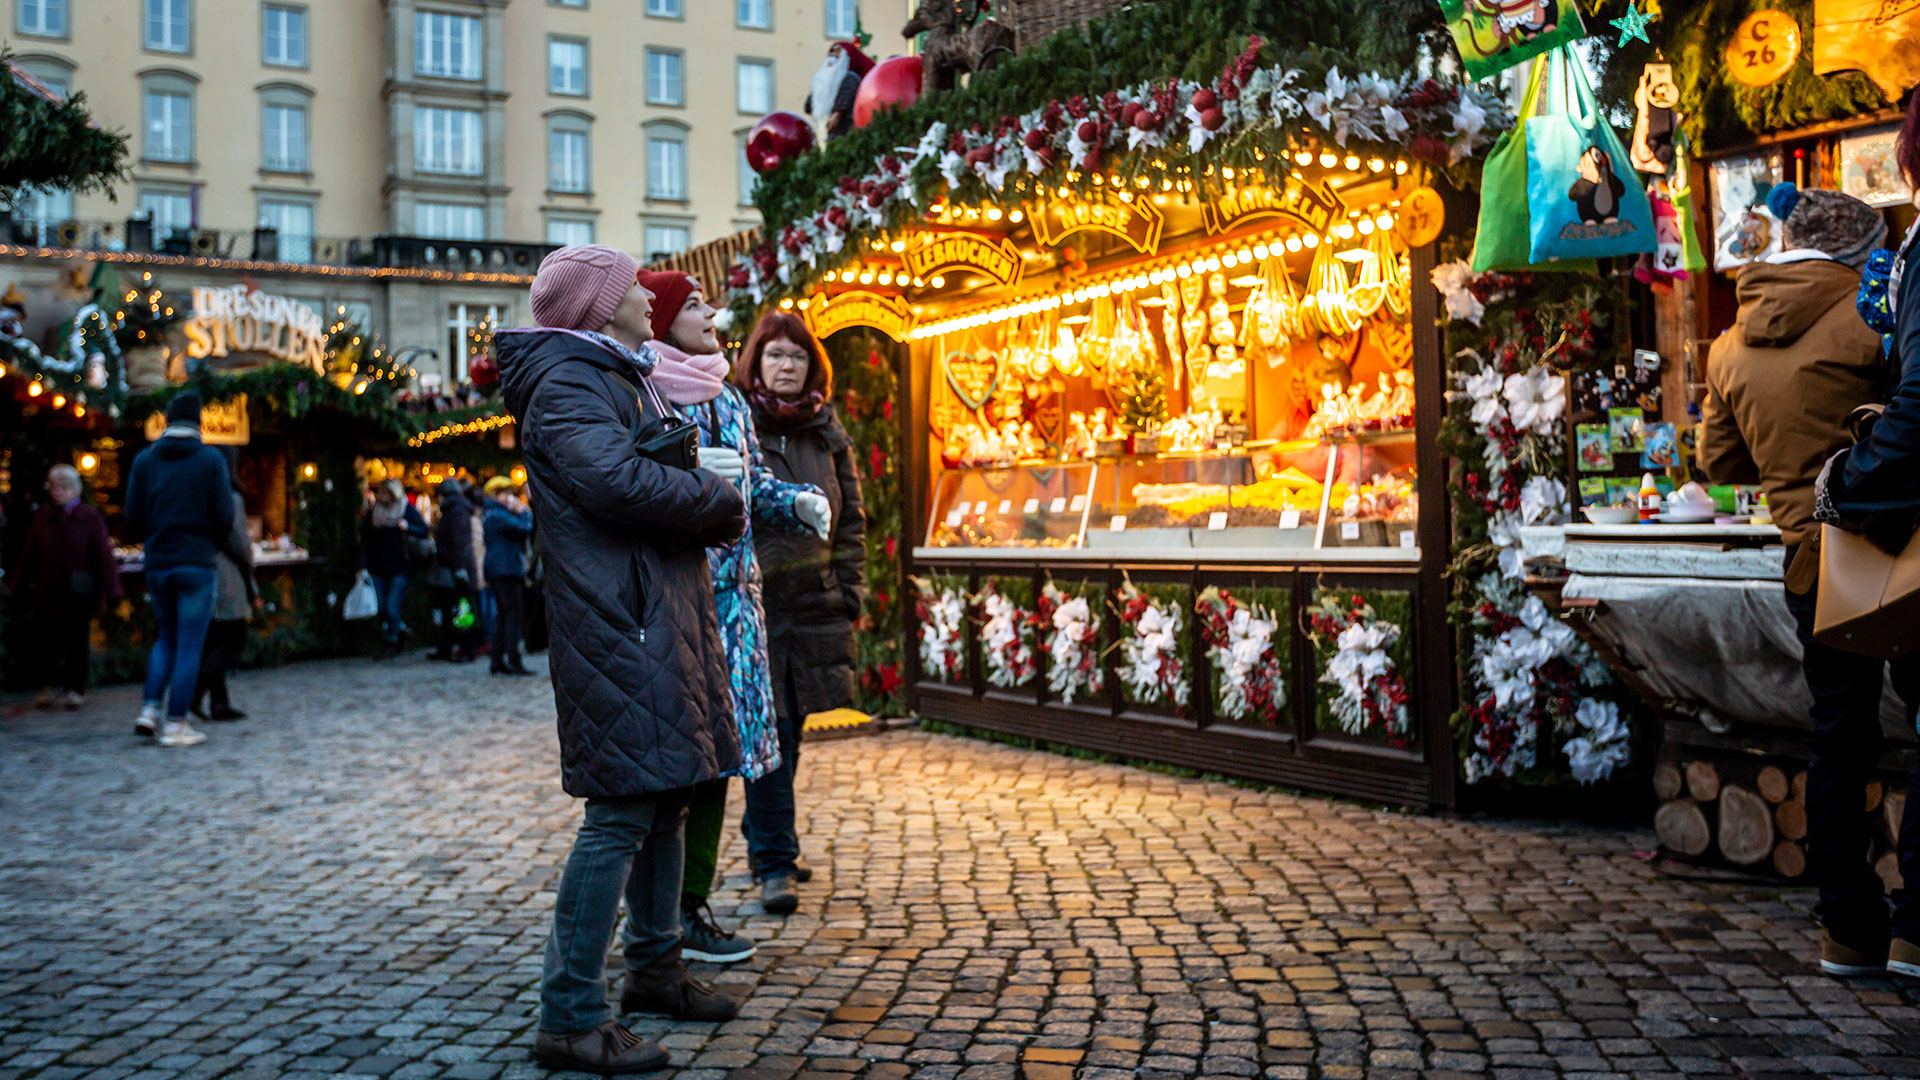 Visitors are delighted by the handcrafted toys at a stand at the Striezelmarkt Christmas market in Dresden, Germany.